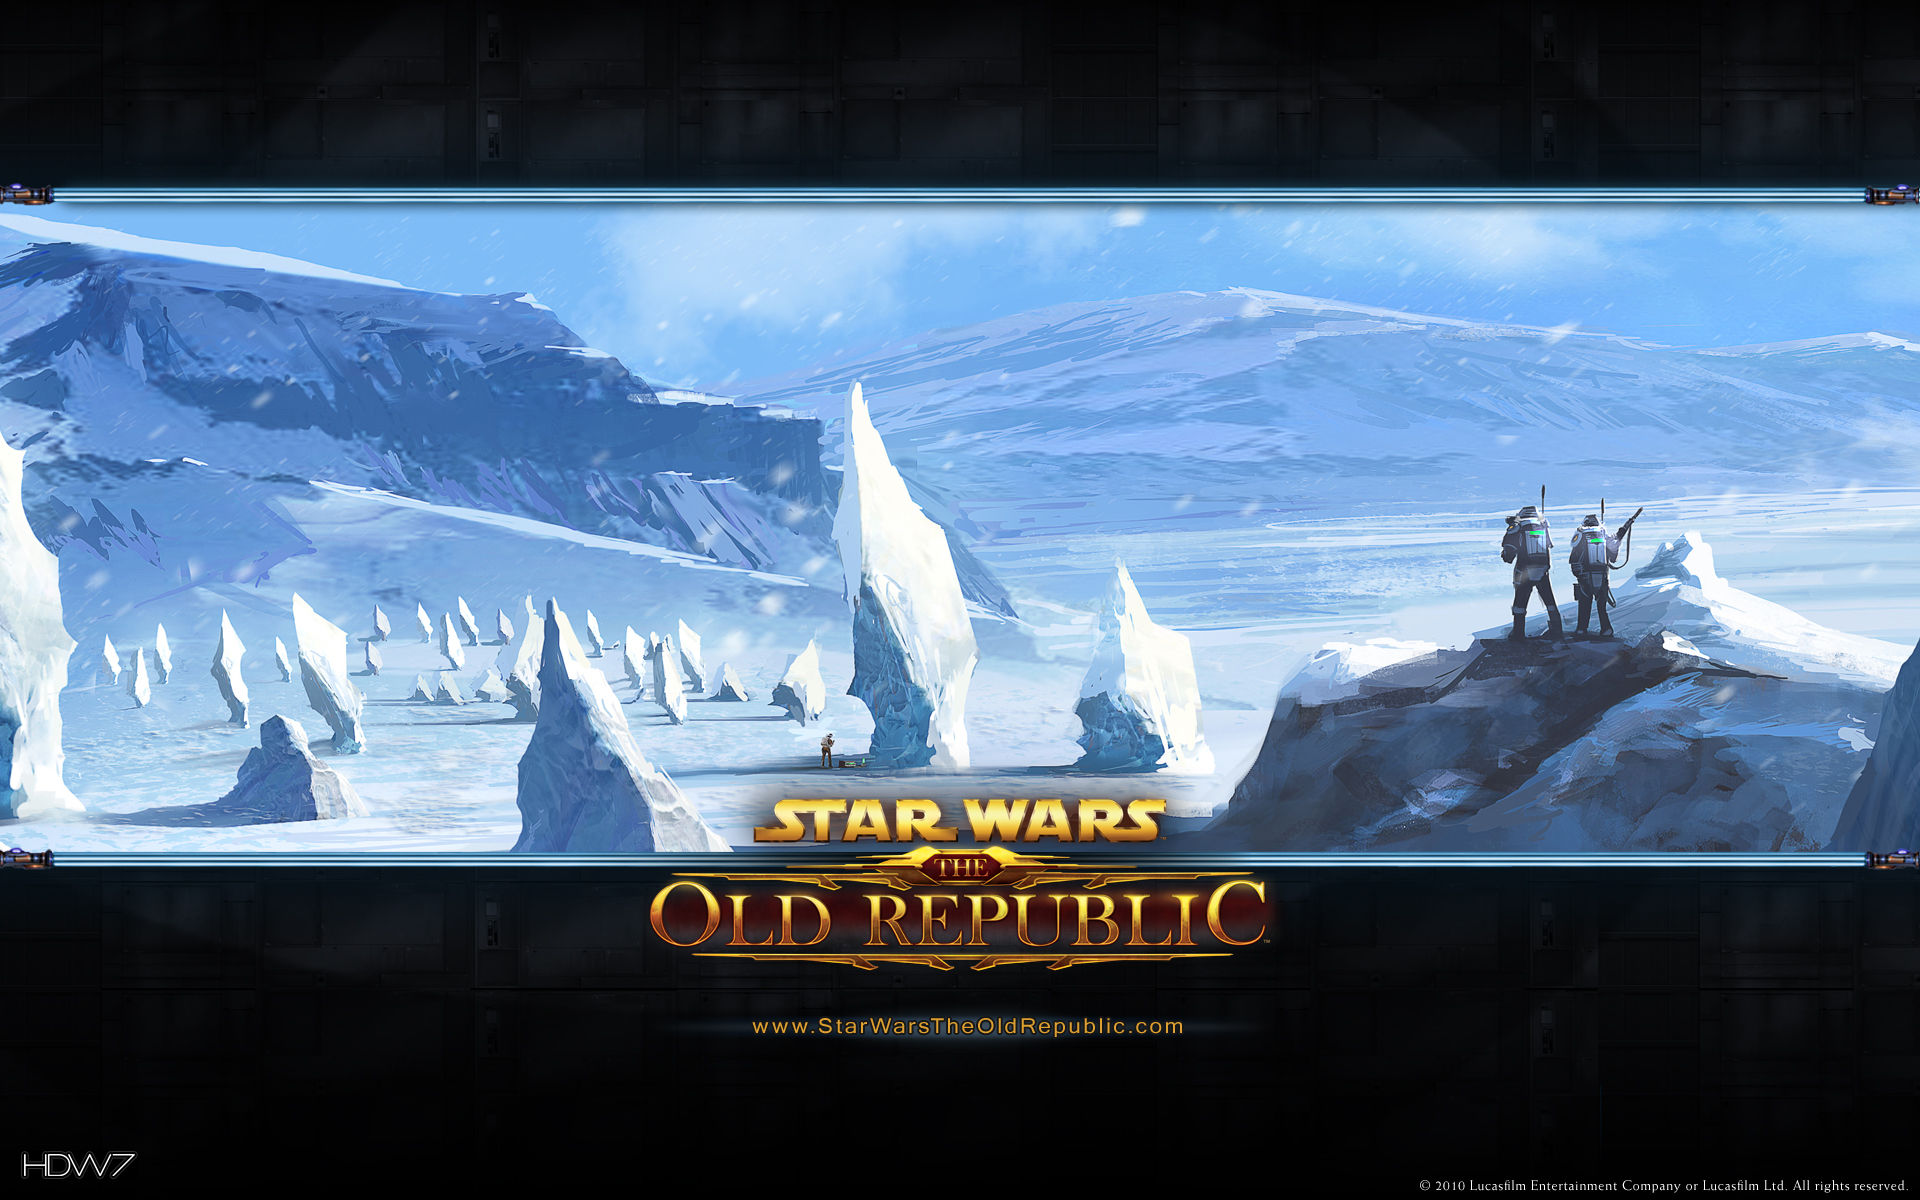 Star Wars The Old Republic Hoth Widescreen Wallpaper - Star Wars The Old Republic Hoth - HD Wallpaper 